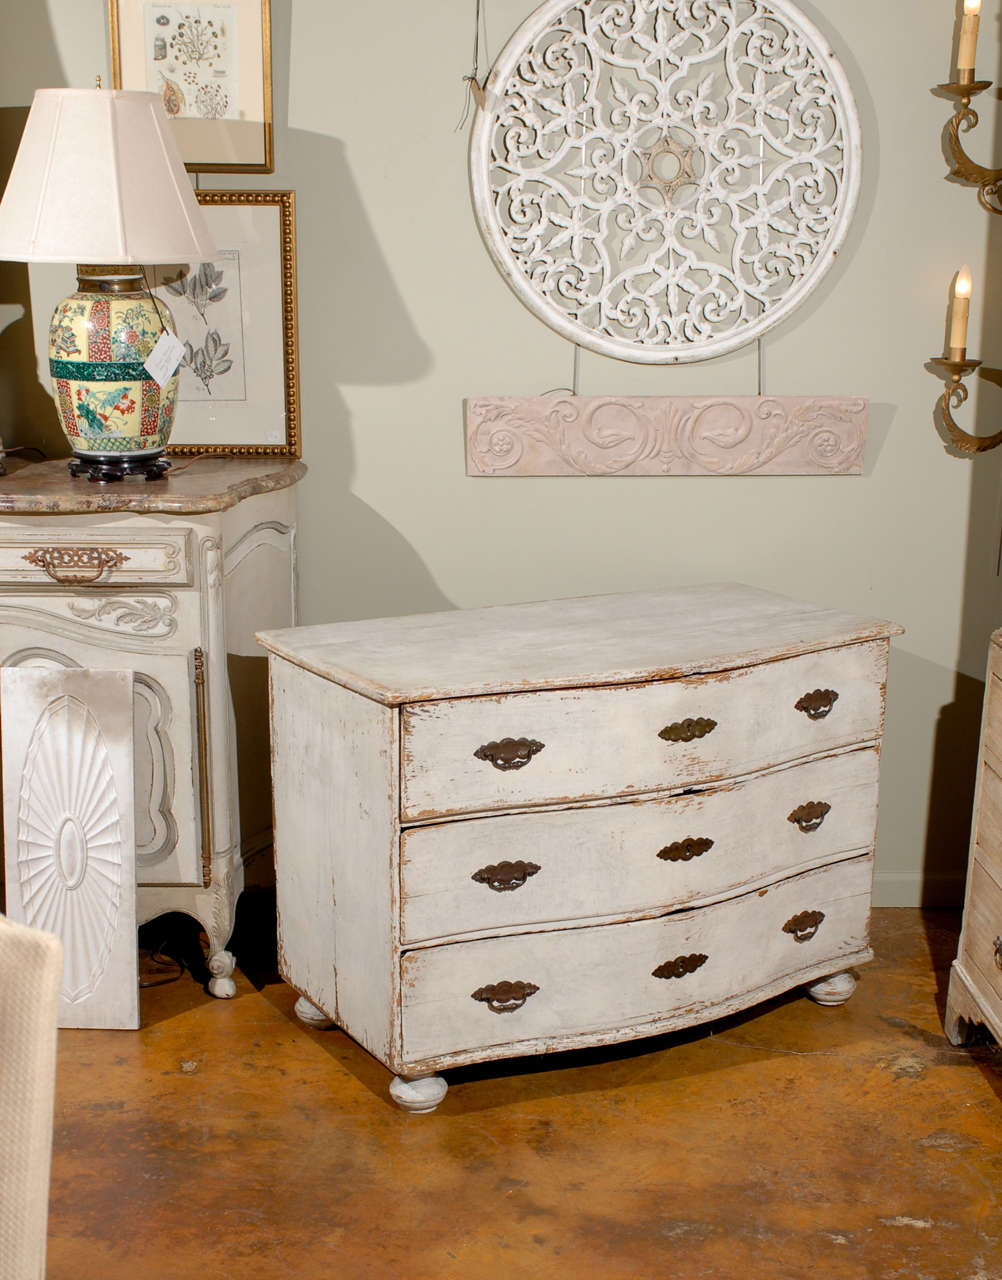 A Swedish 18th century Baroque period three-drawer painted pine chest with serpentine front and bun feet. This swedish light grey painted chest of drawers features a shaped rectangular top sitting above a serpentine front. Each hand-cut dovetailed